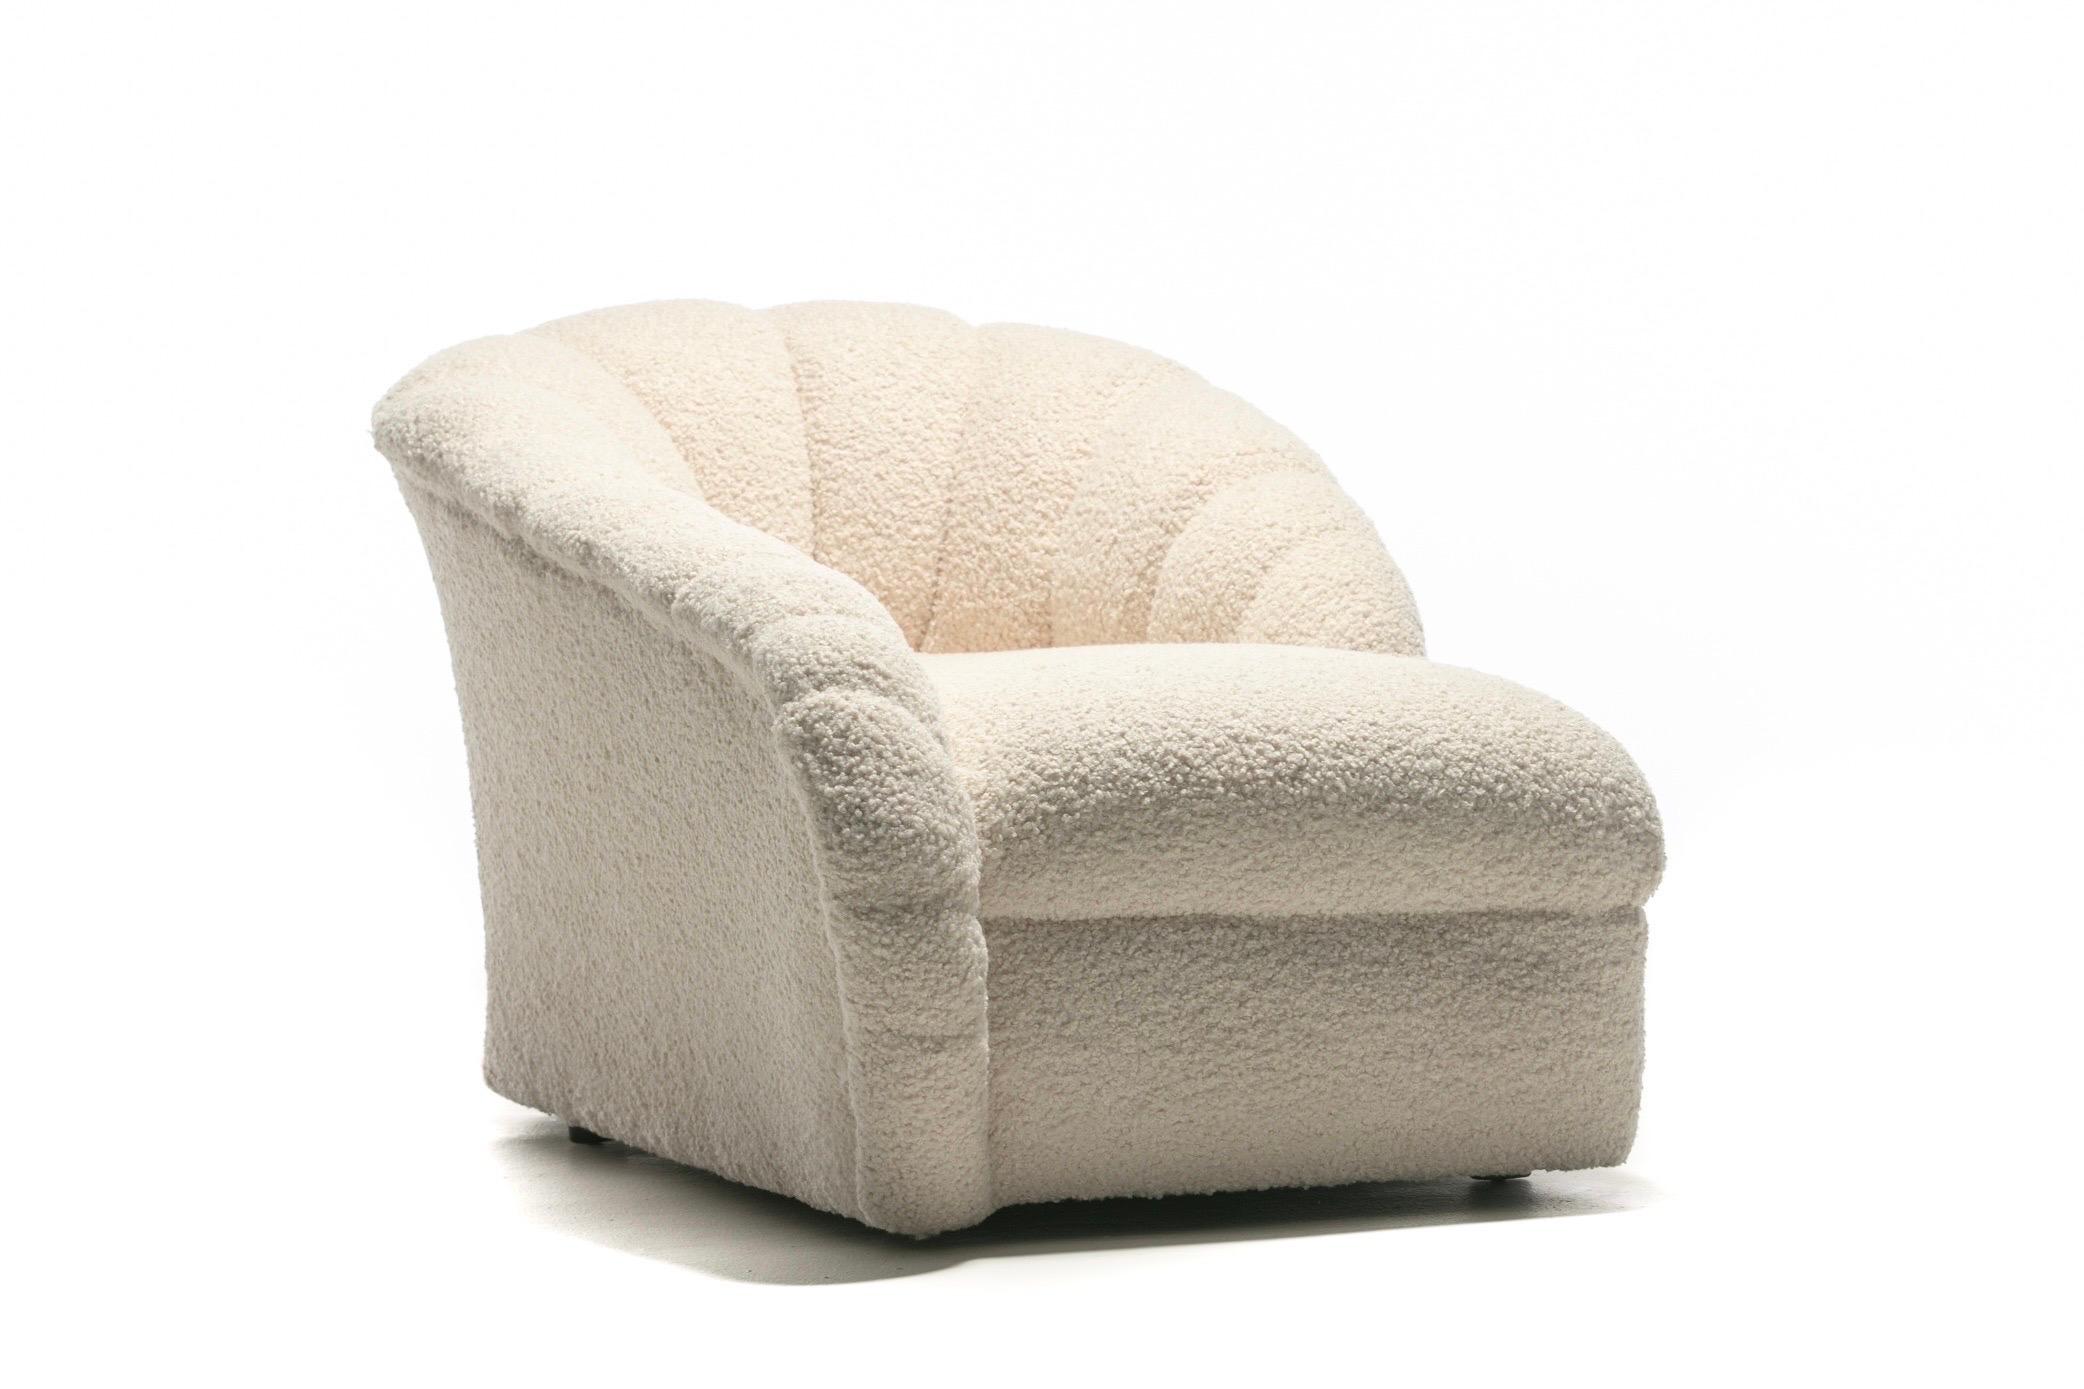 American Vladimir Kagan Post Modern Clam Chaise Lounge in Soft Ivory White Bouclé 1980s For Sale